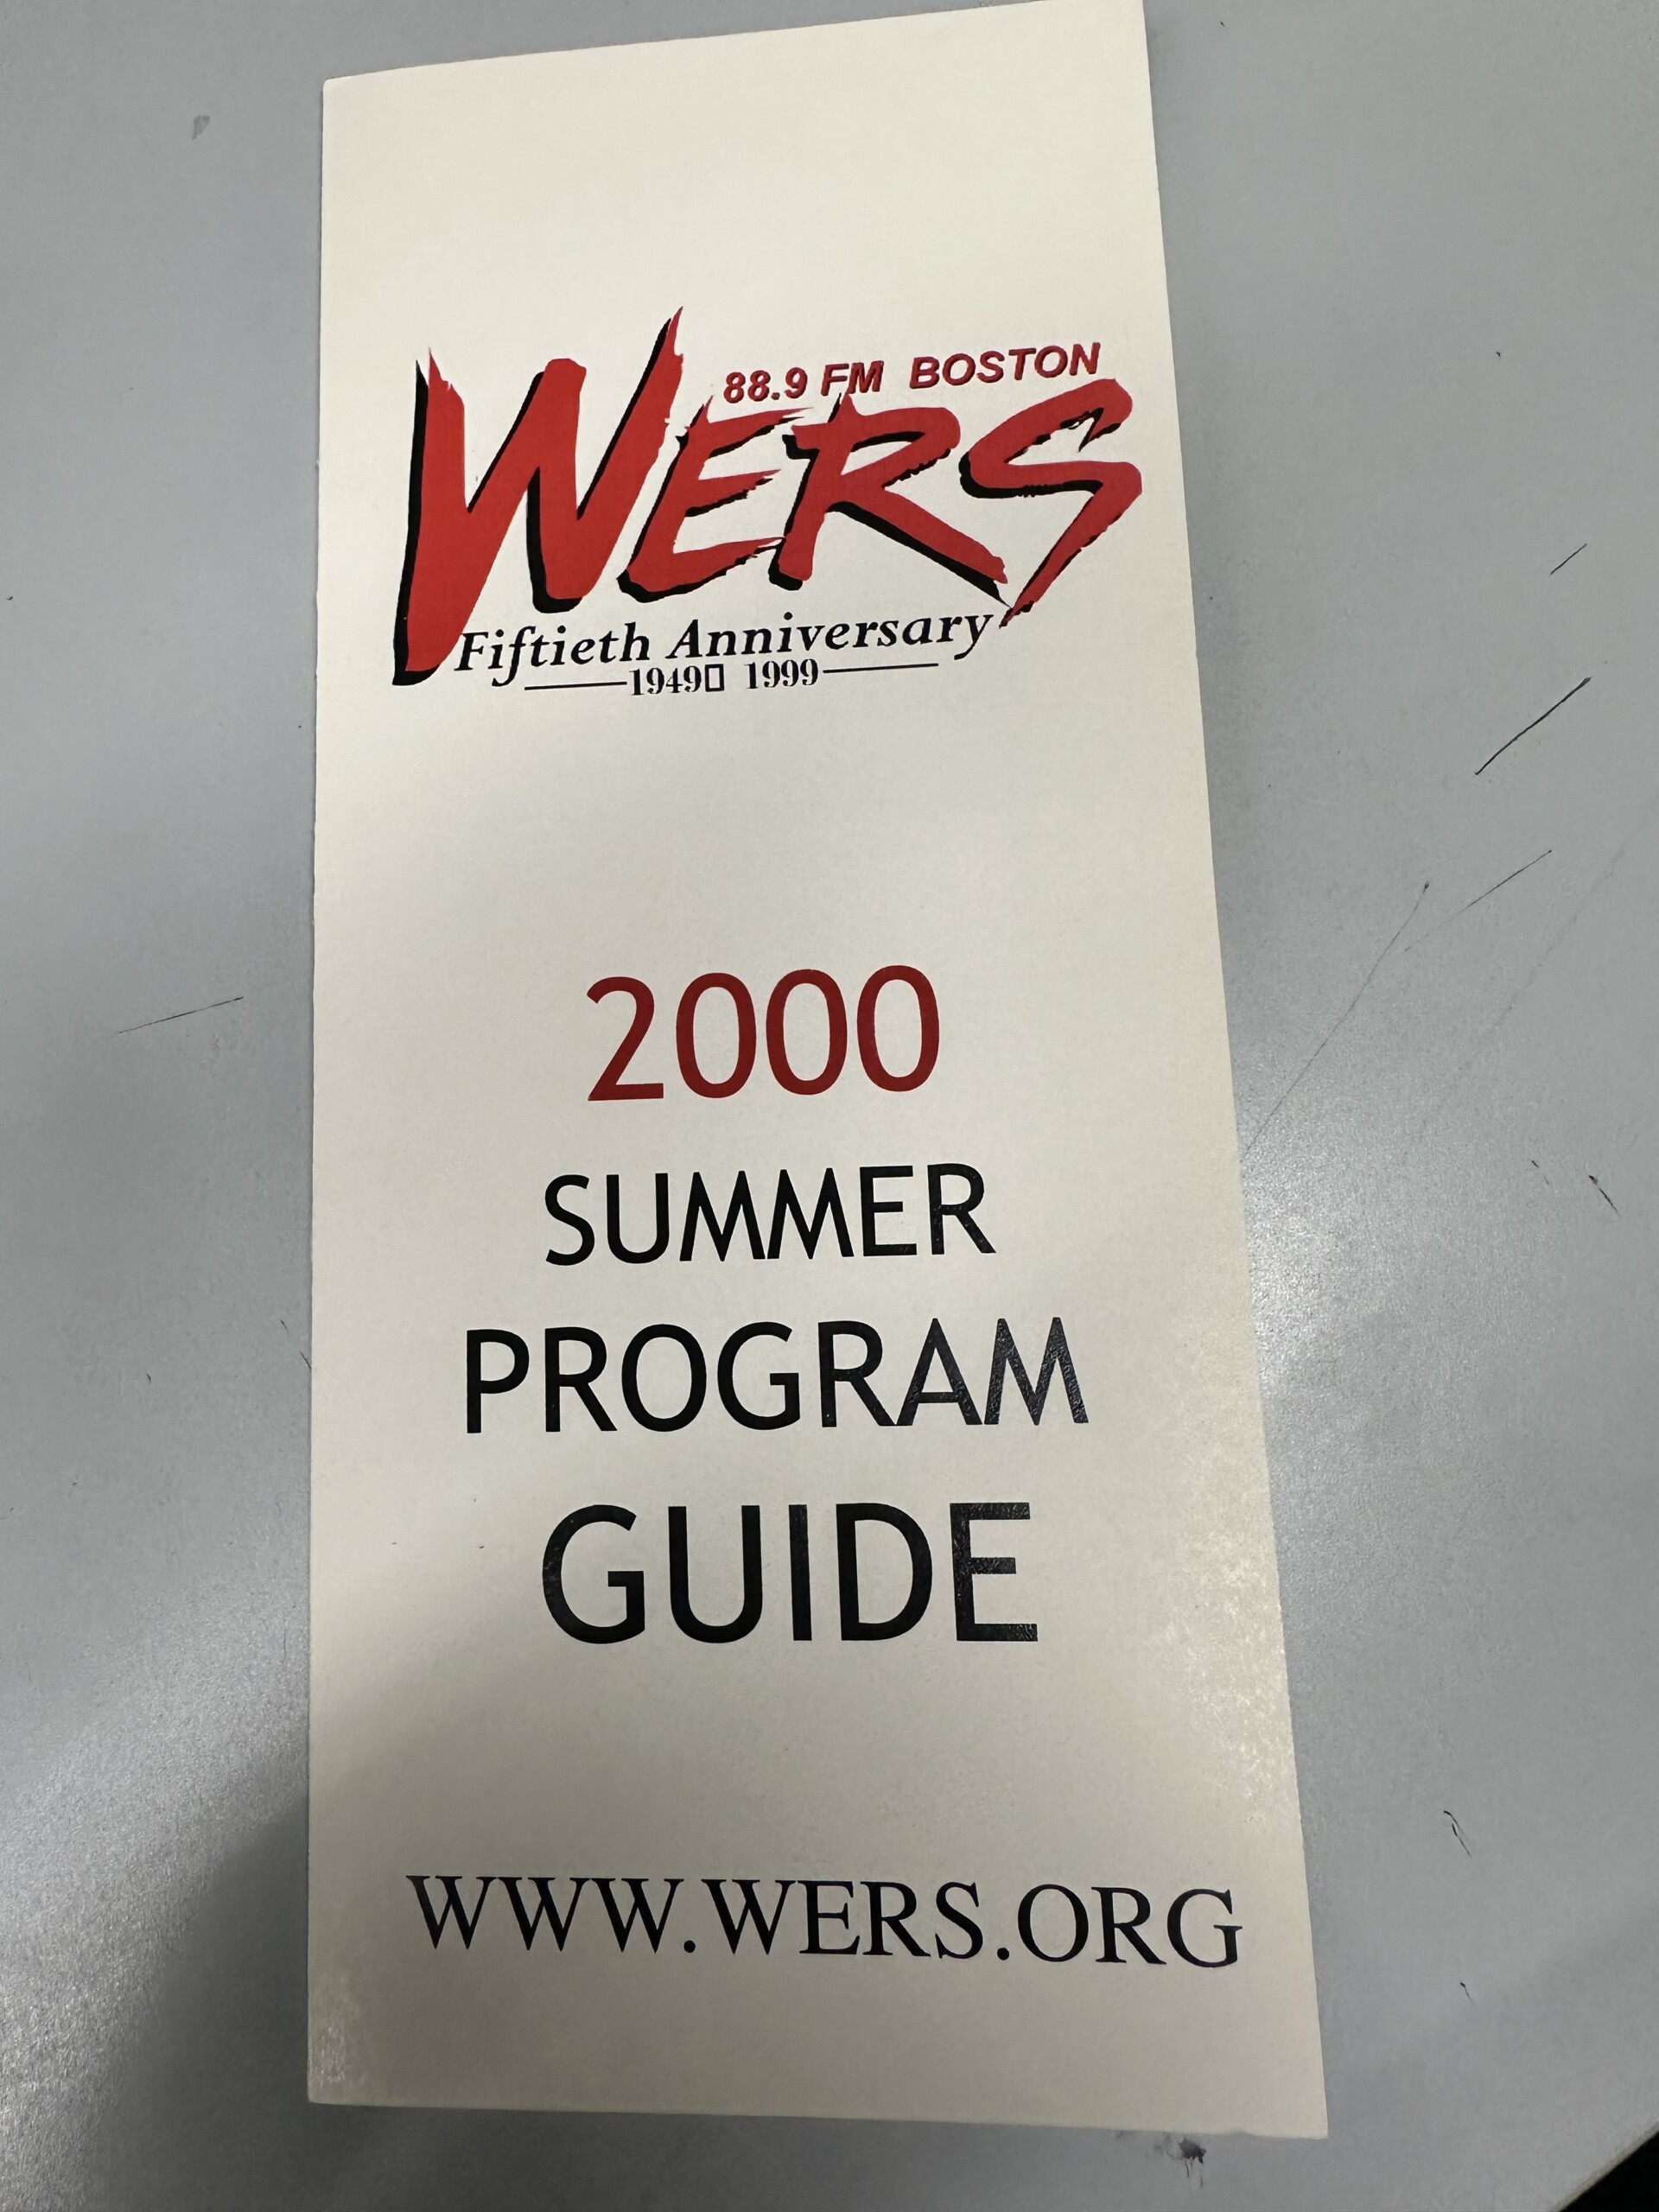 WERS' listener program guide from the summer of 2000.